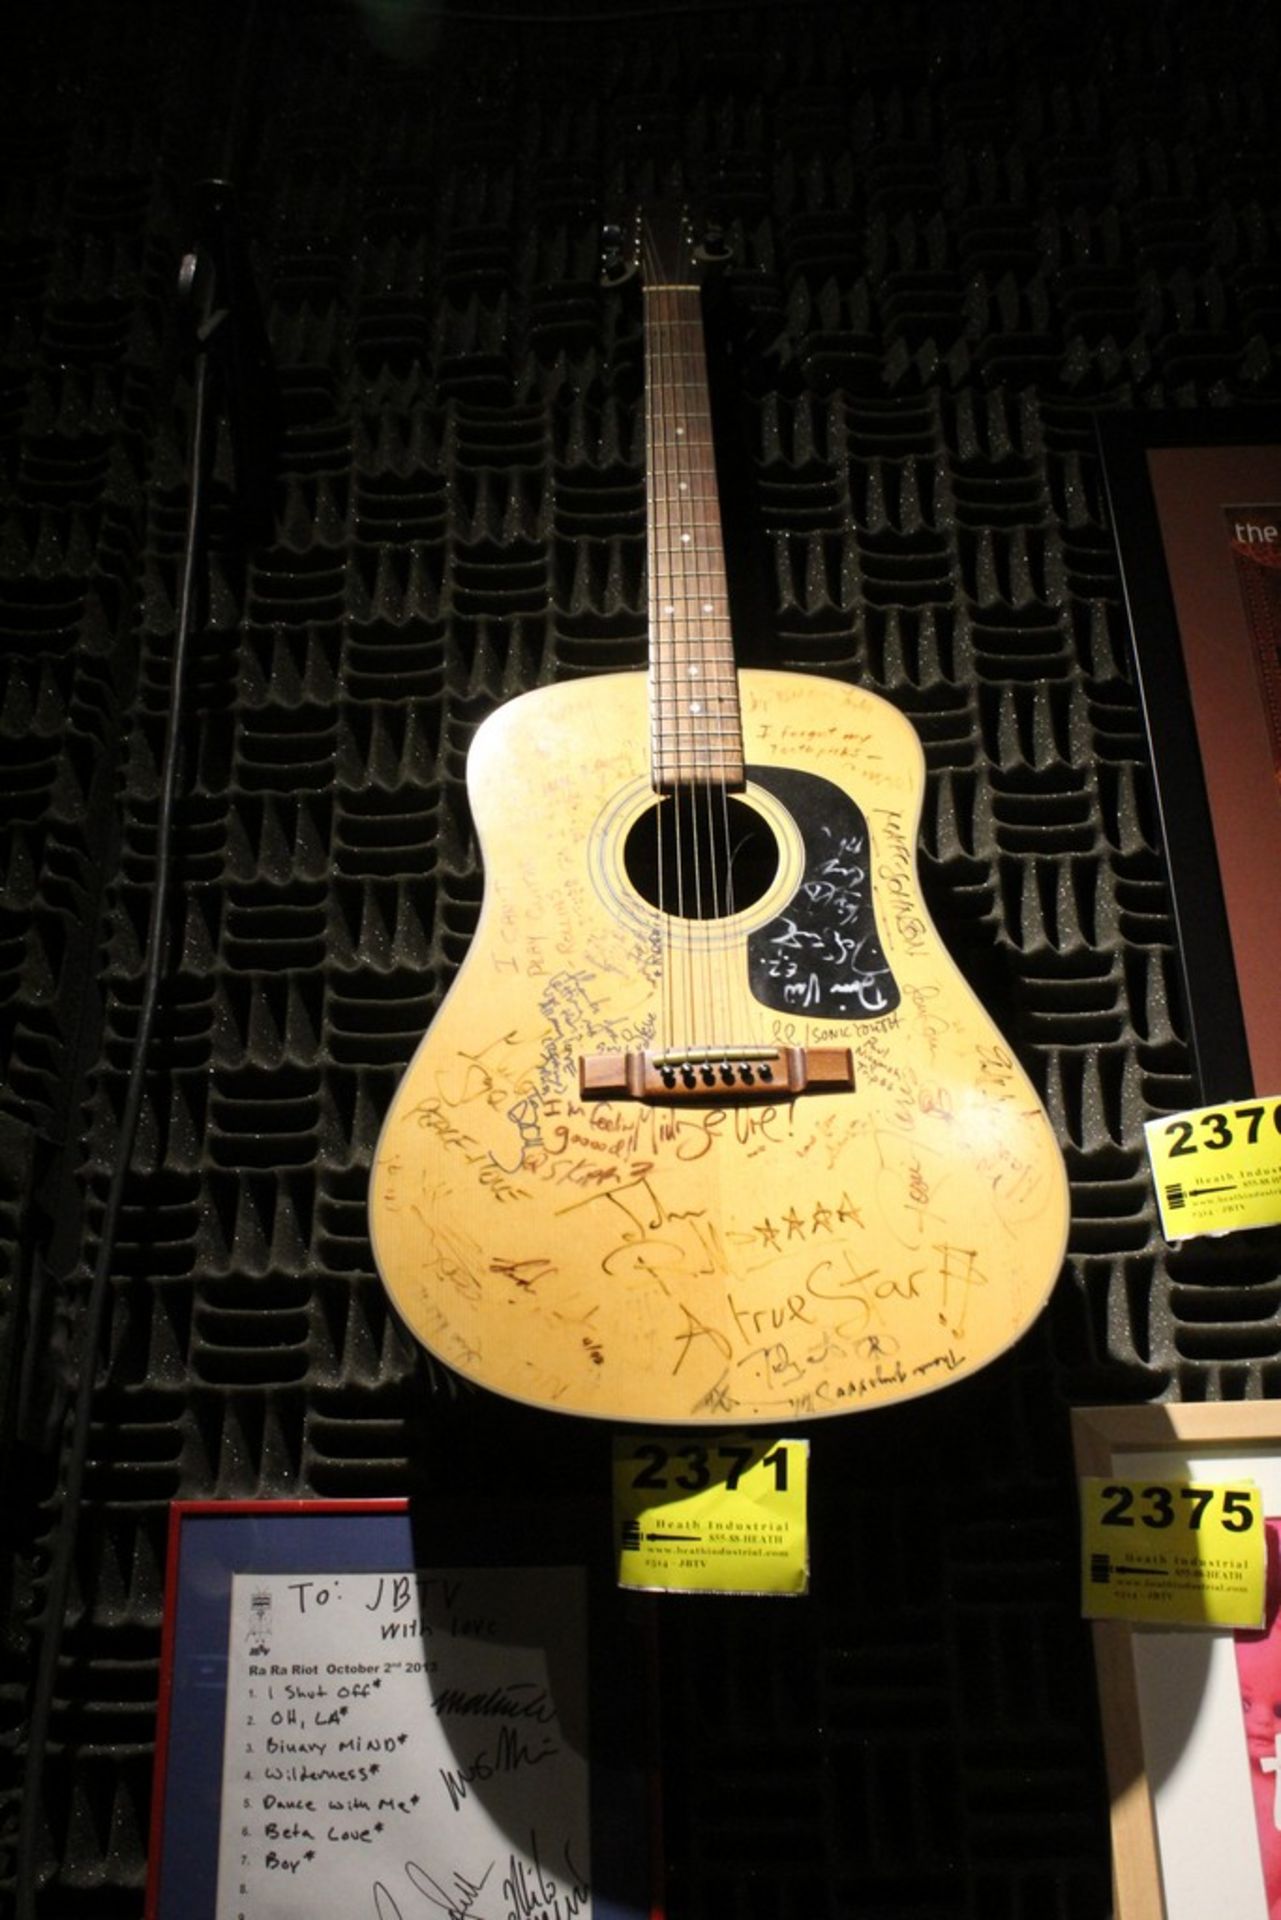 Signed Acoustic Guitar- Henry Rollins, Members of Sonic Youth, Members of Thin Lizzy - Image 2 of 3